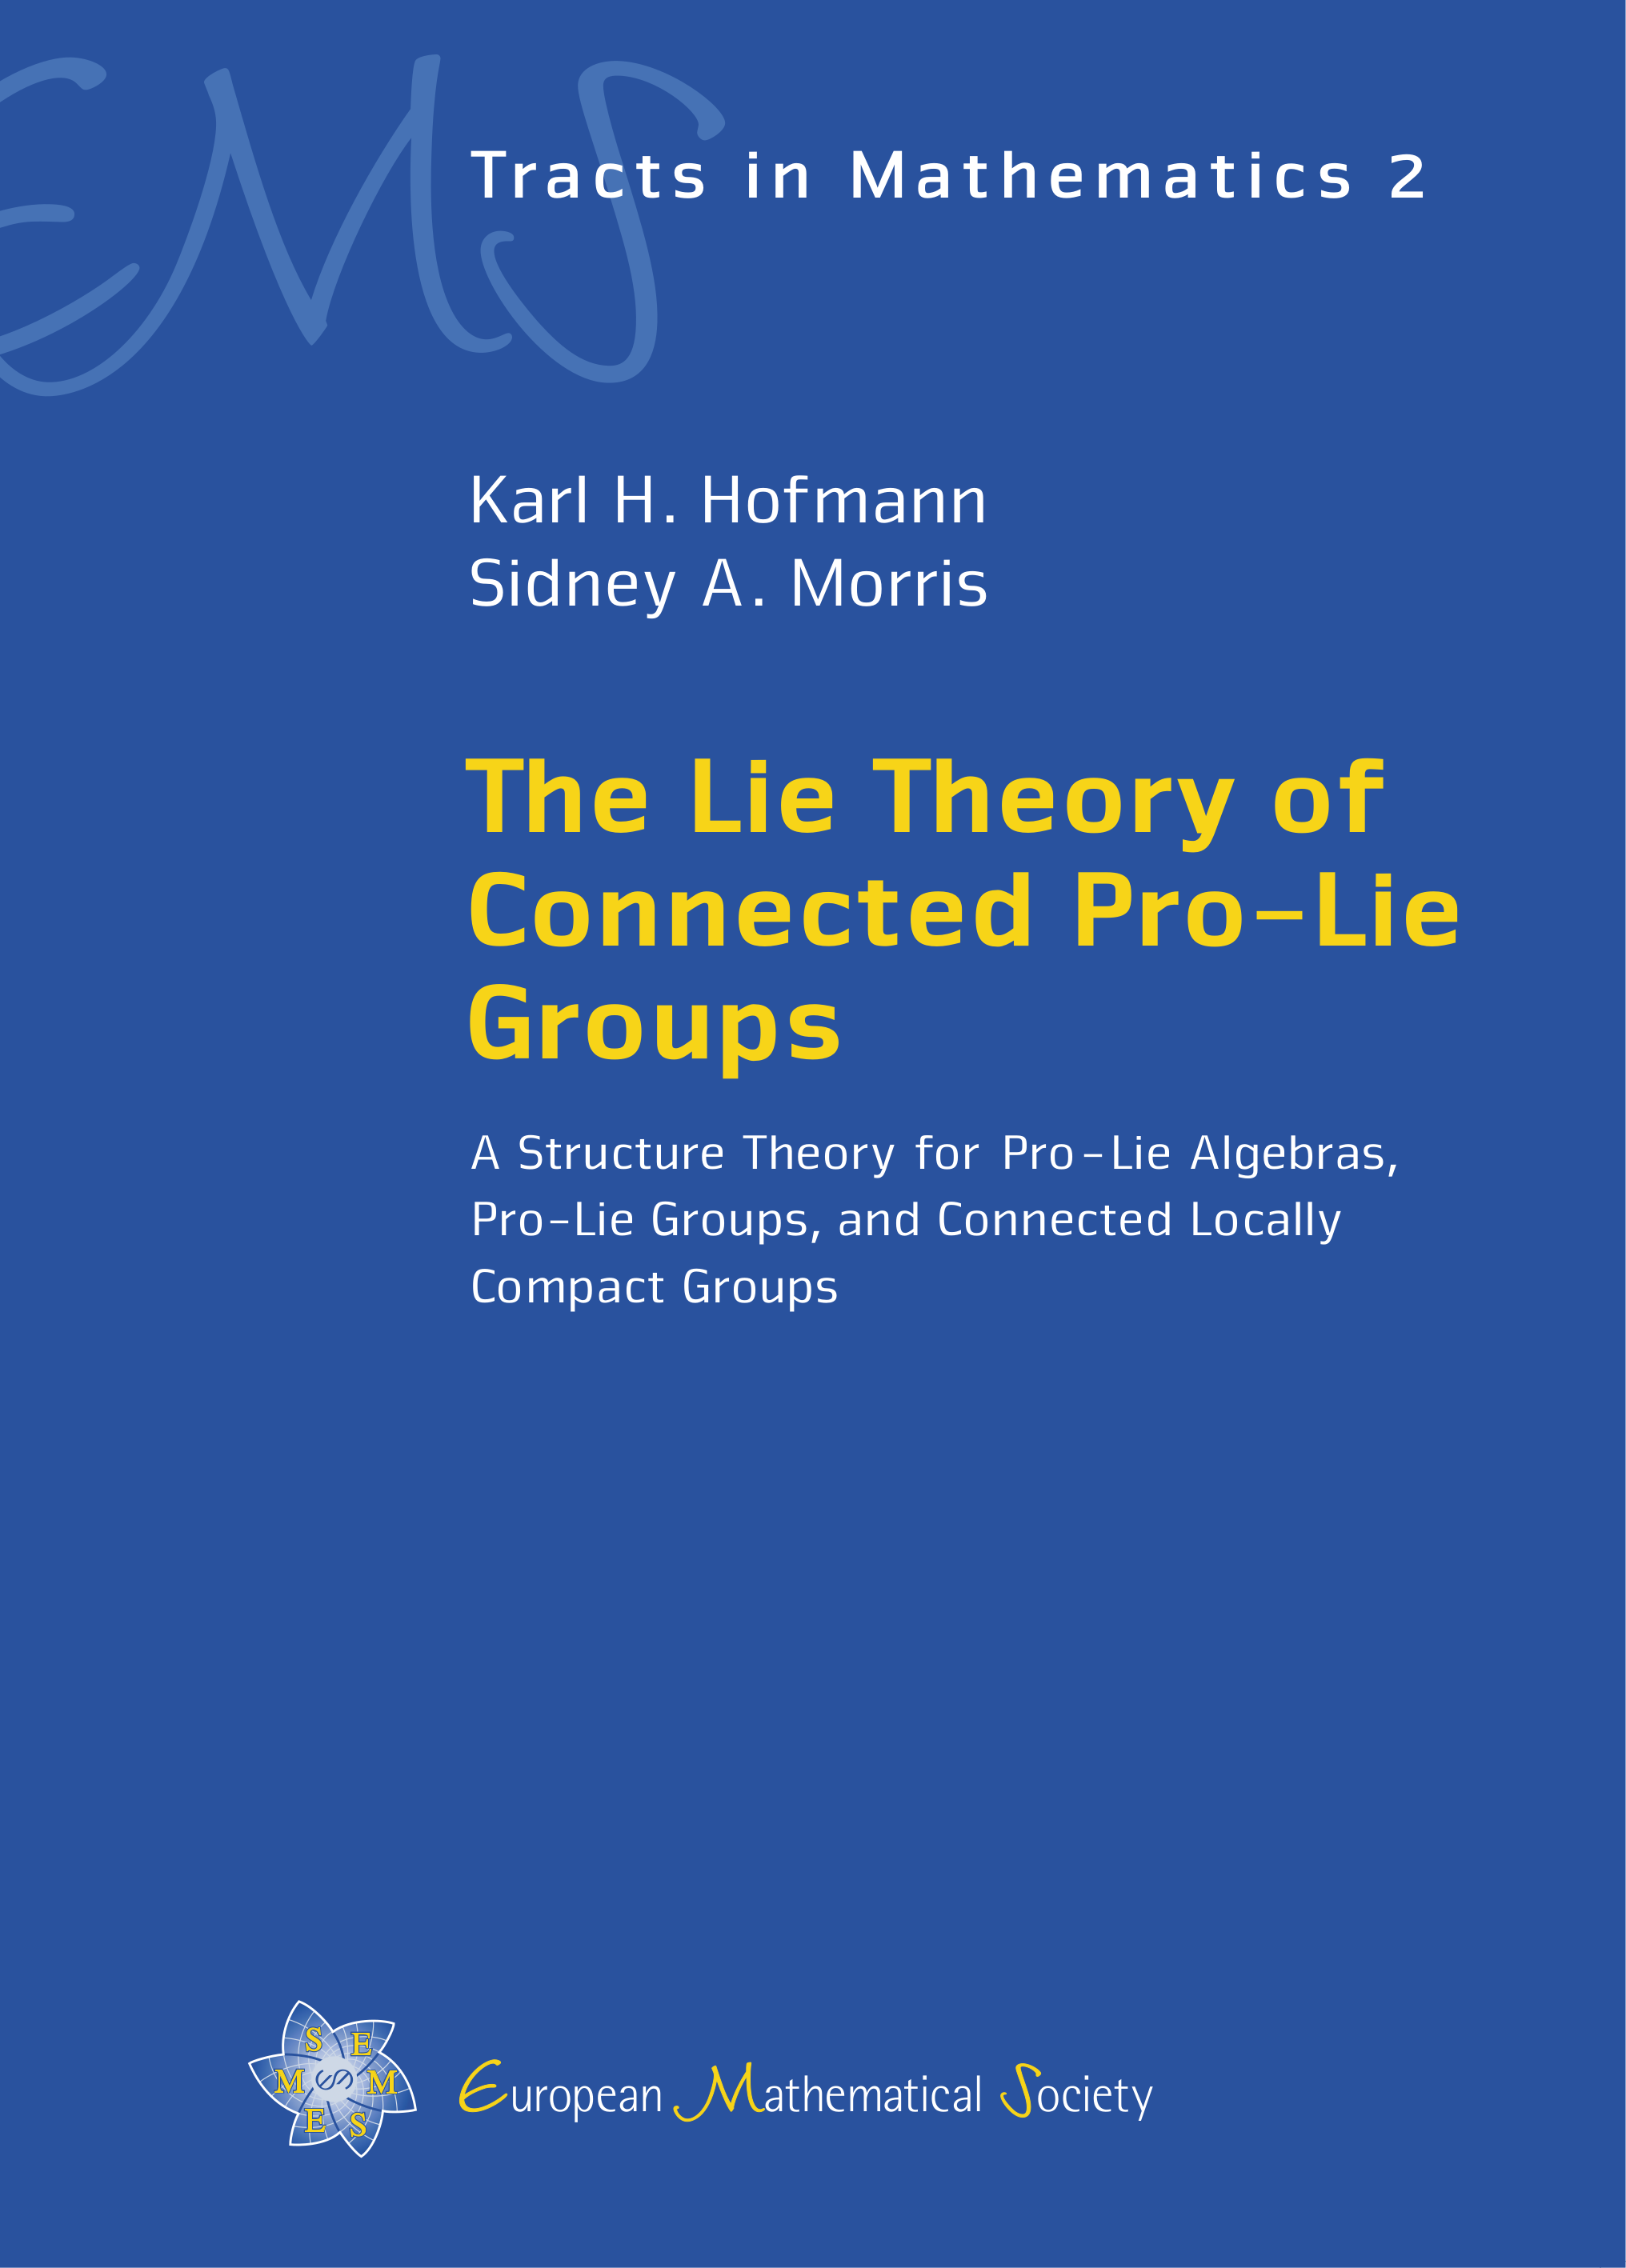 The Global Structure of Connected Pro-Lie Groups cover